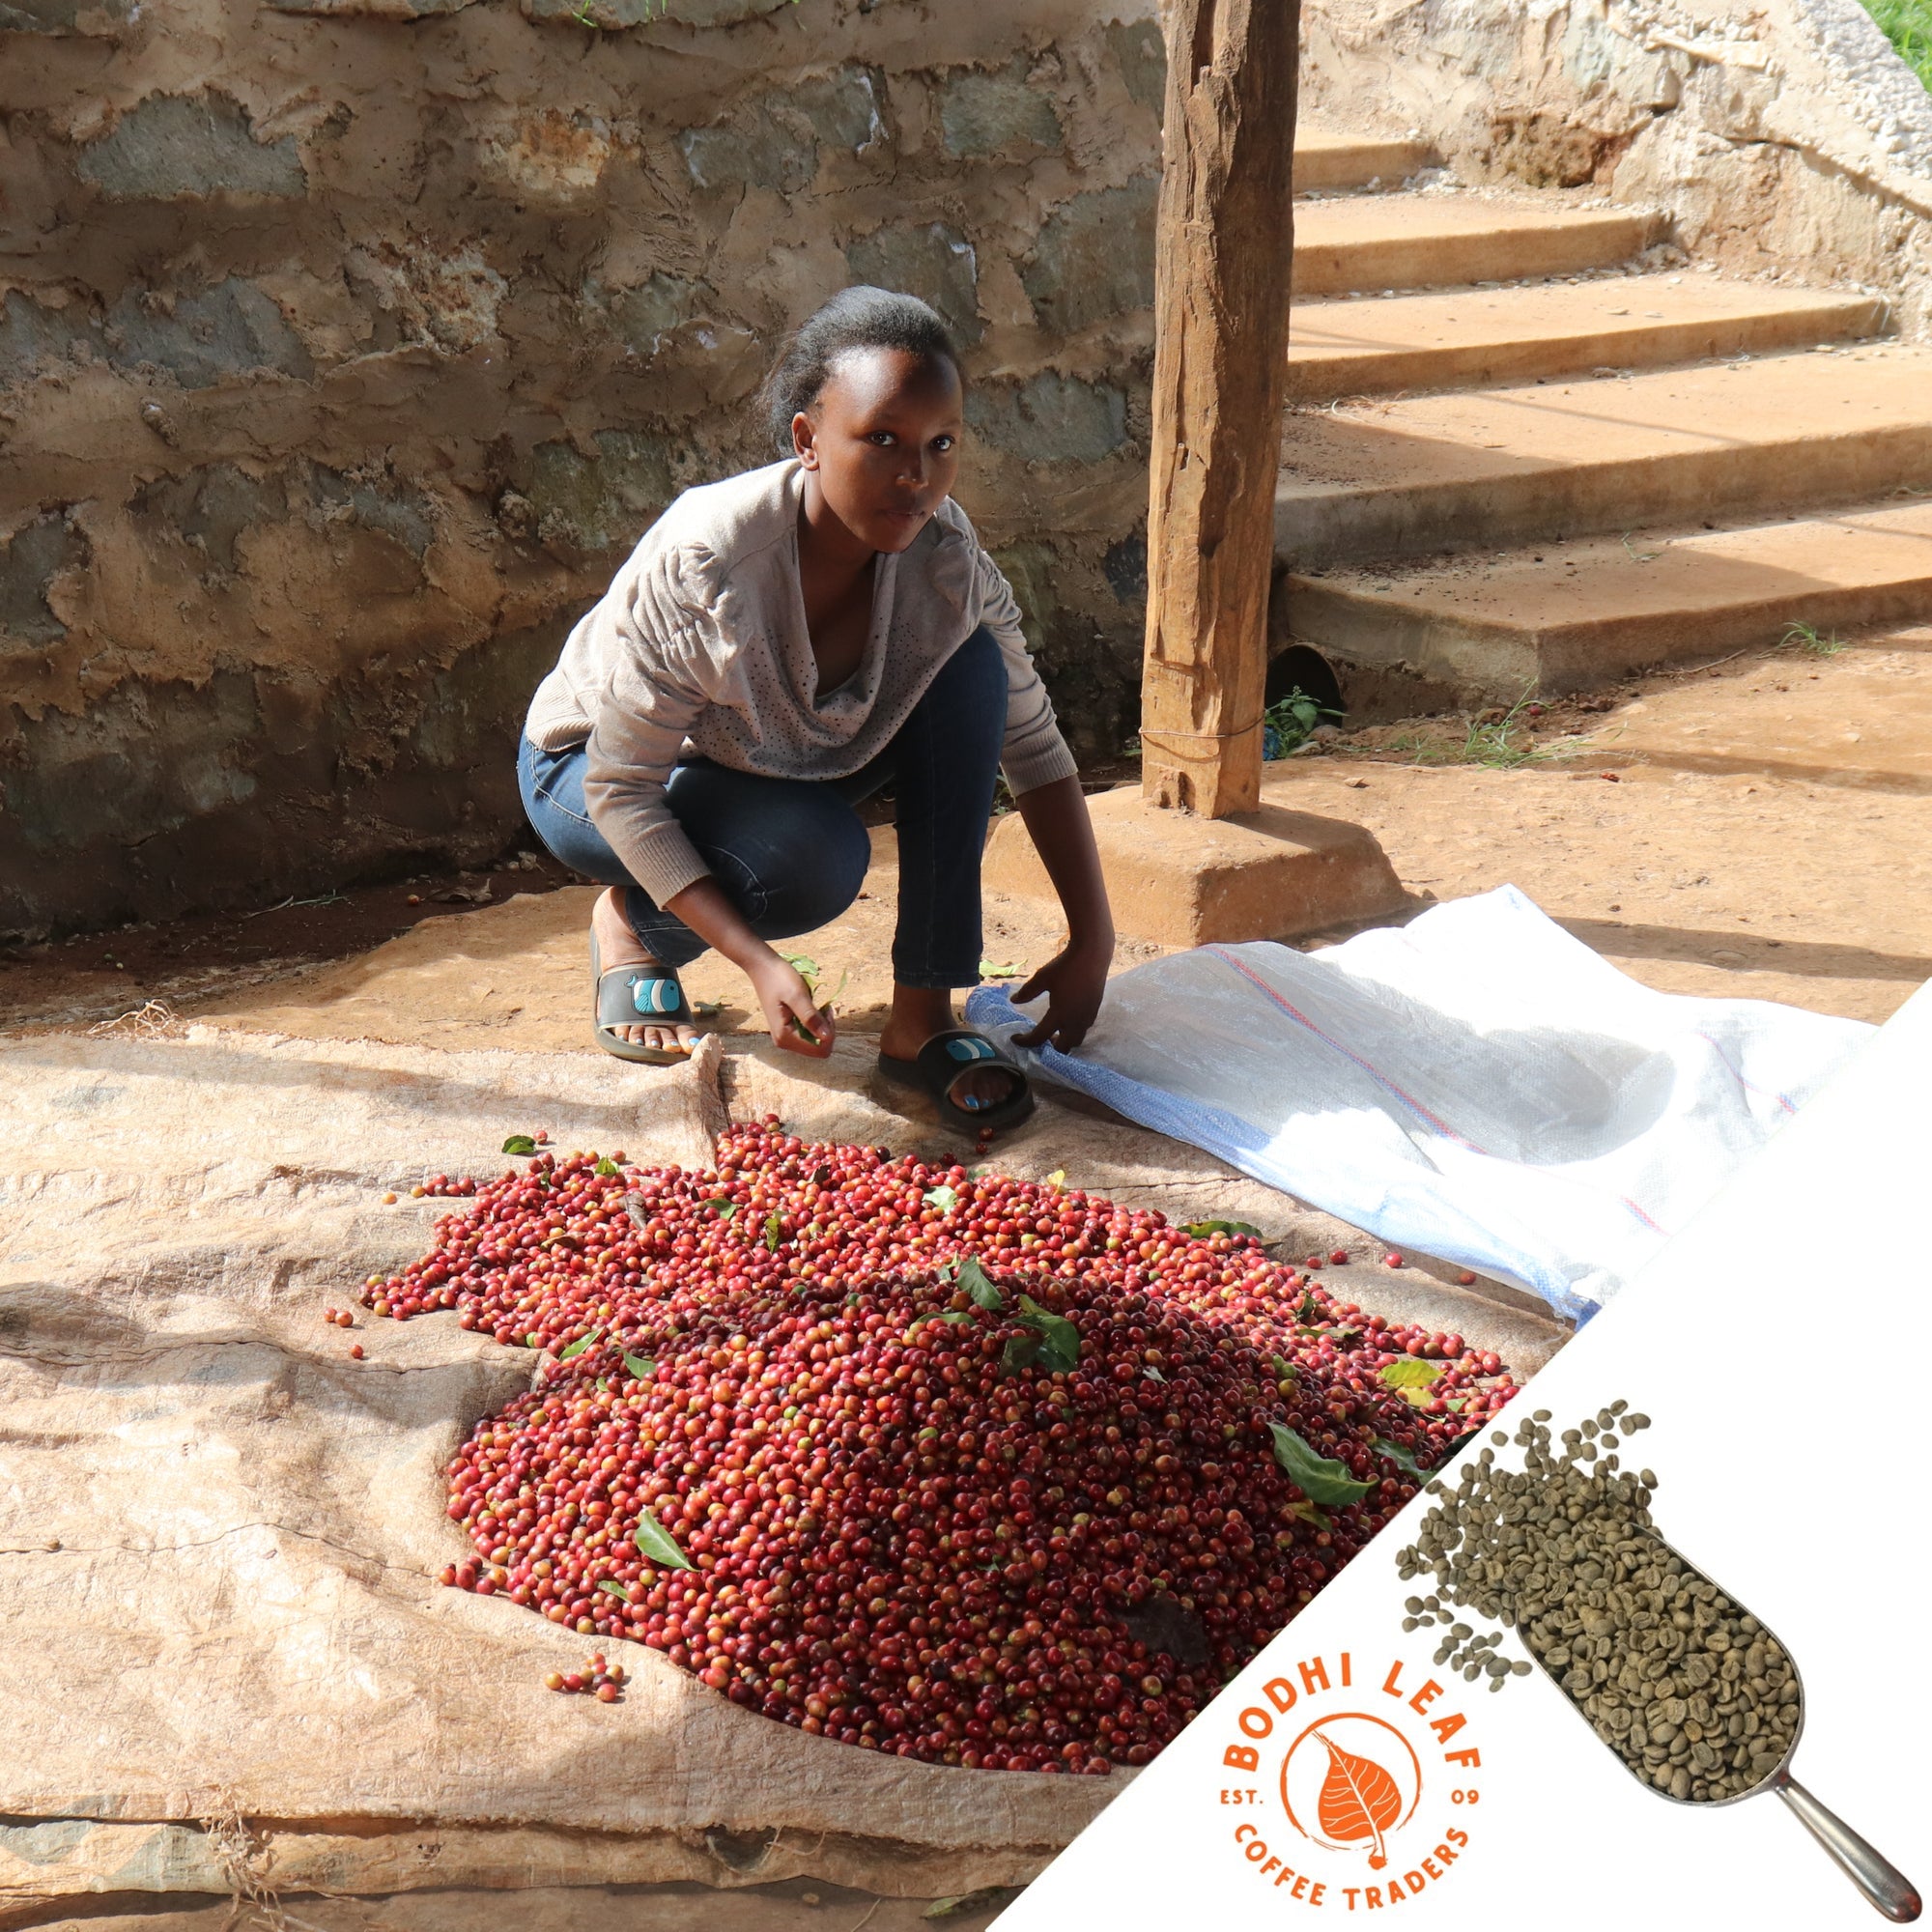 A young woman bending down spreading ripe red coffee cherries  out on burlap bags to dry.